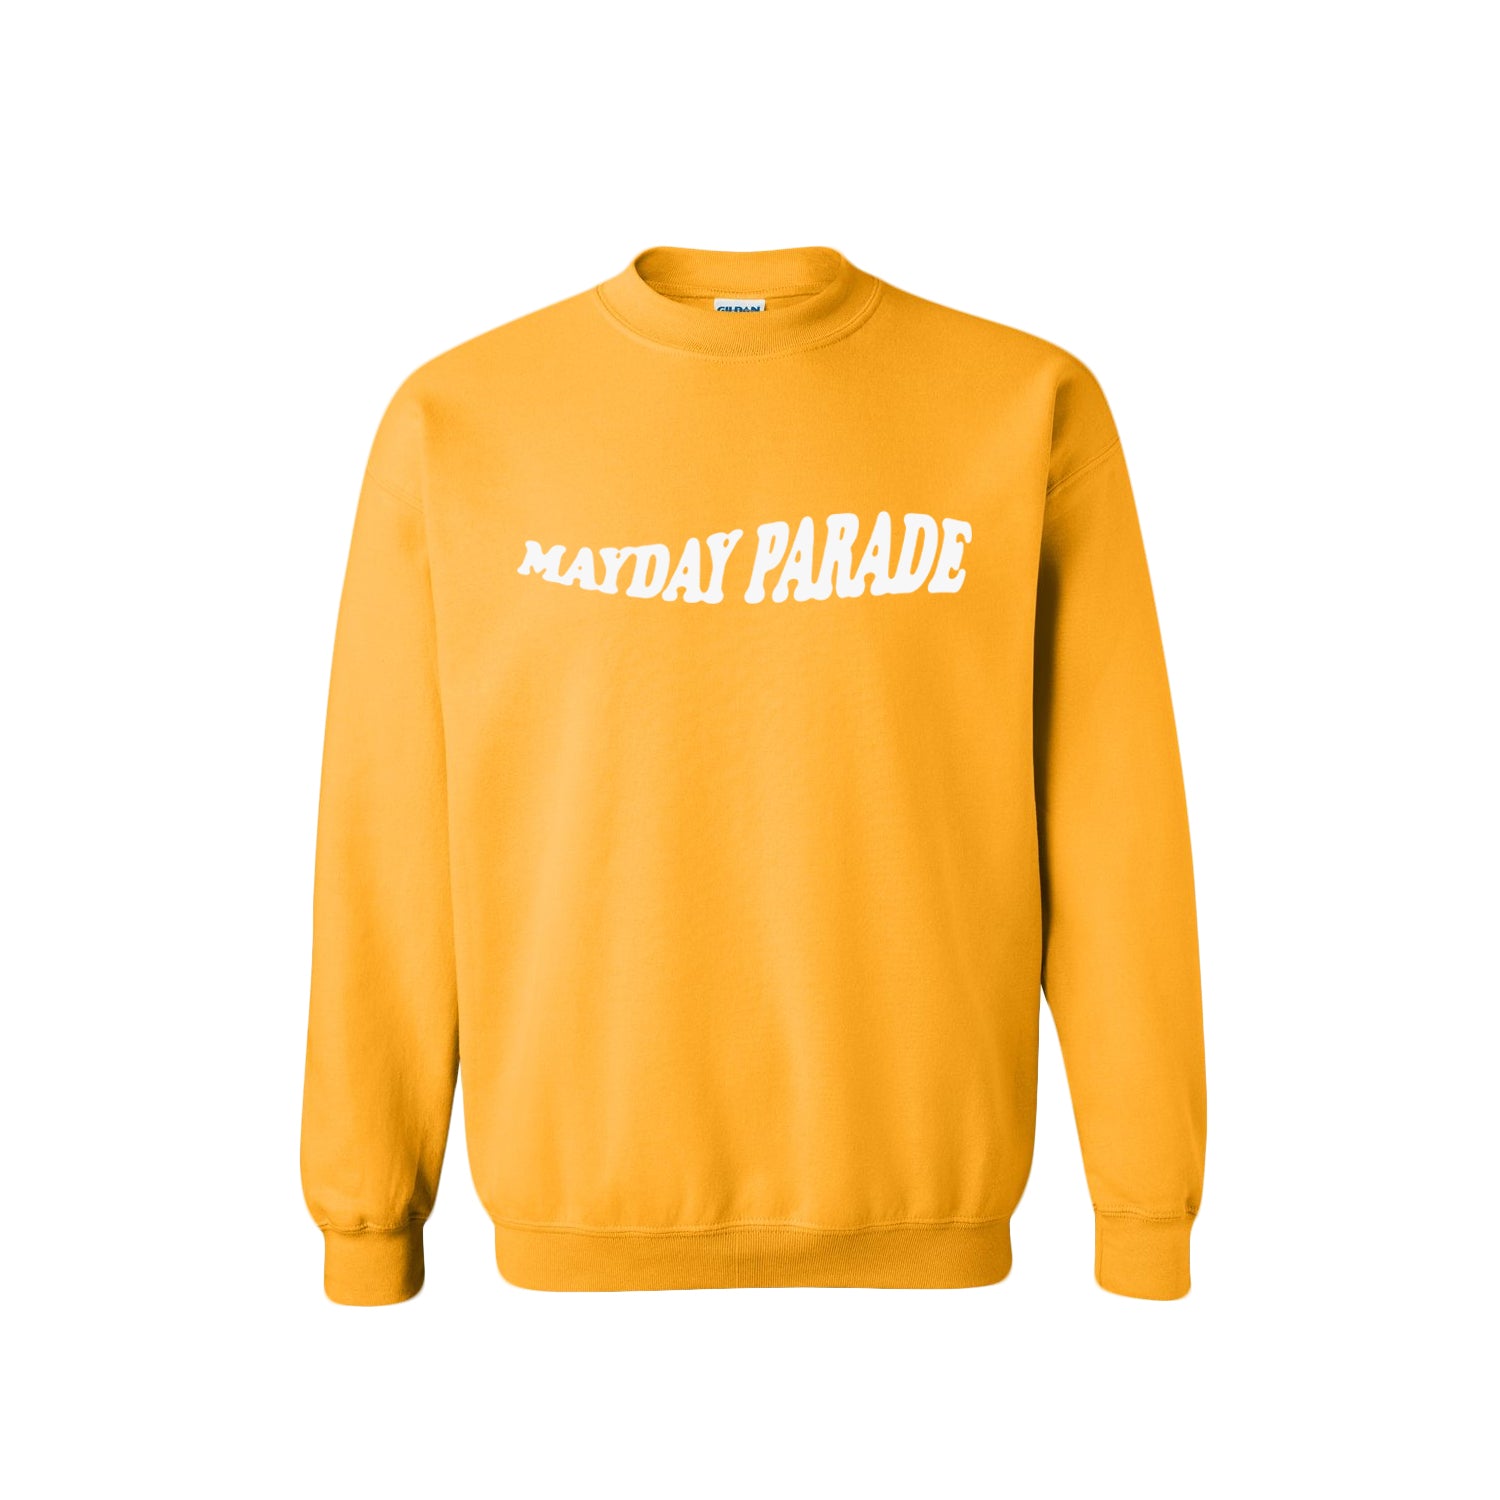 image of the front of a gold crewneck sweatshirt on a white background. crewneck has a white print across the chest that says mayday parade.